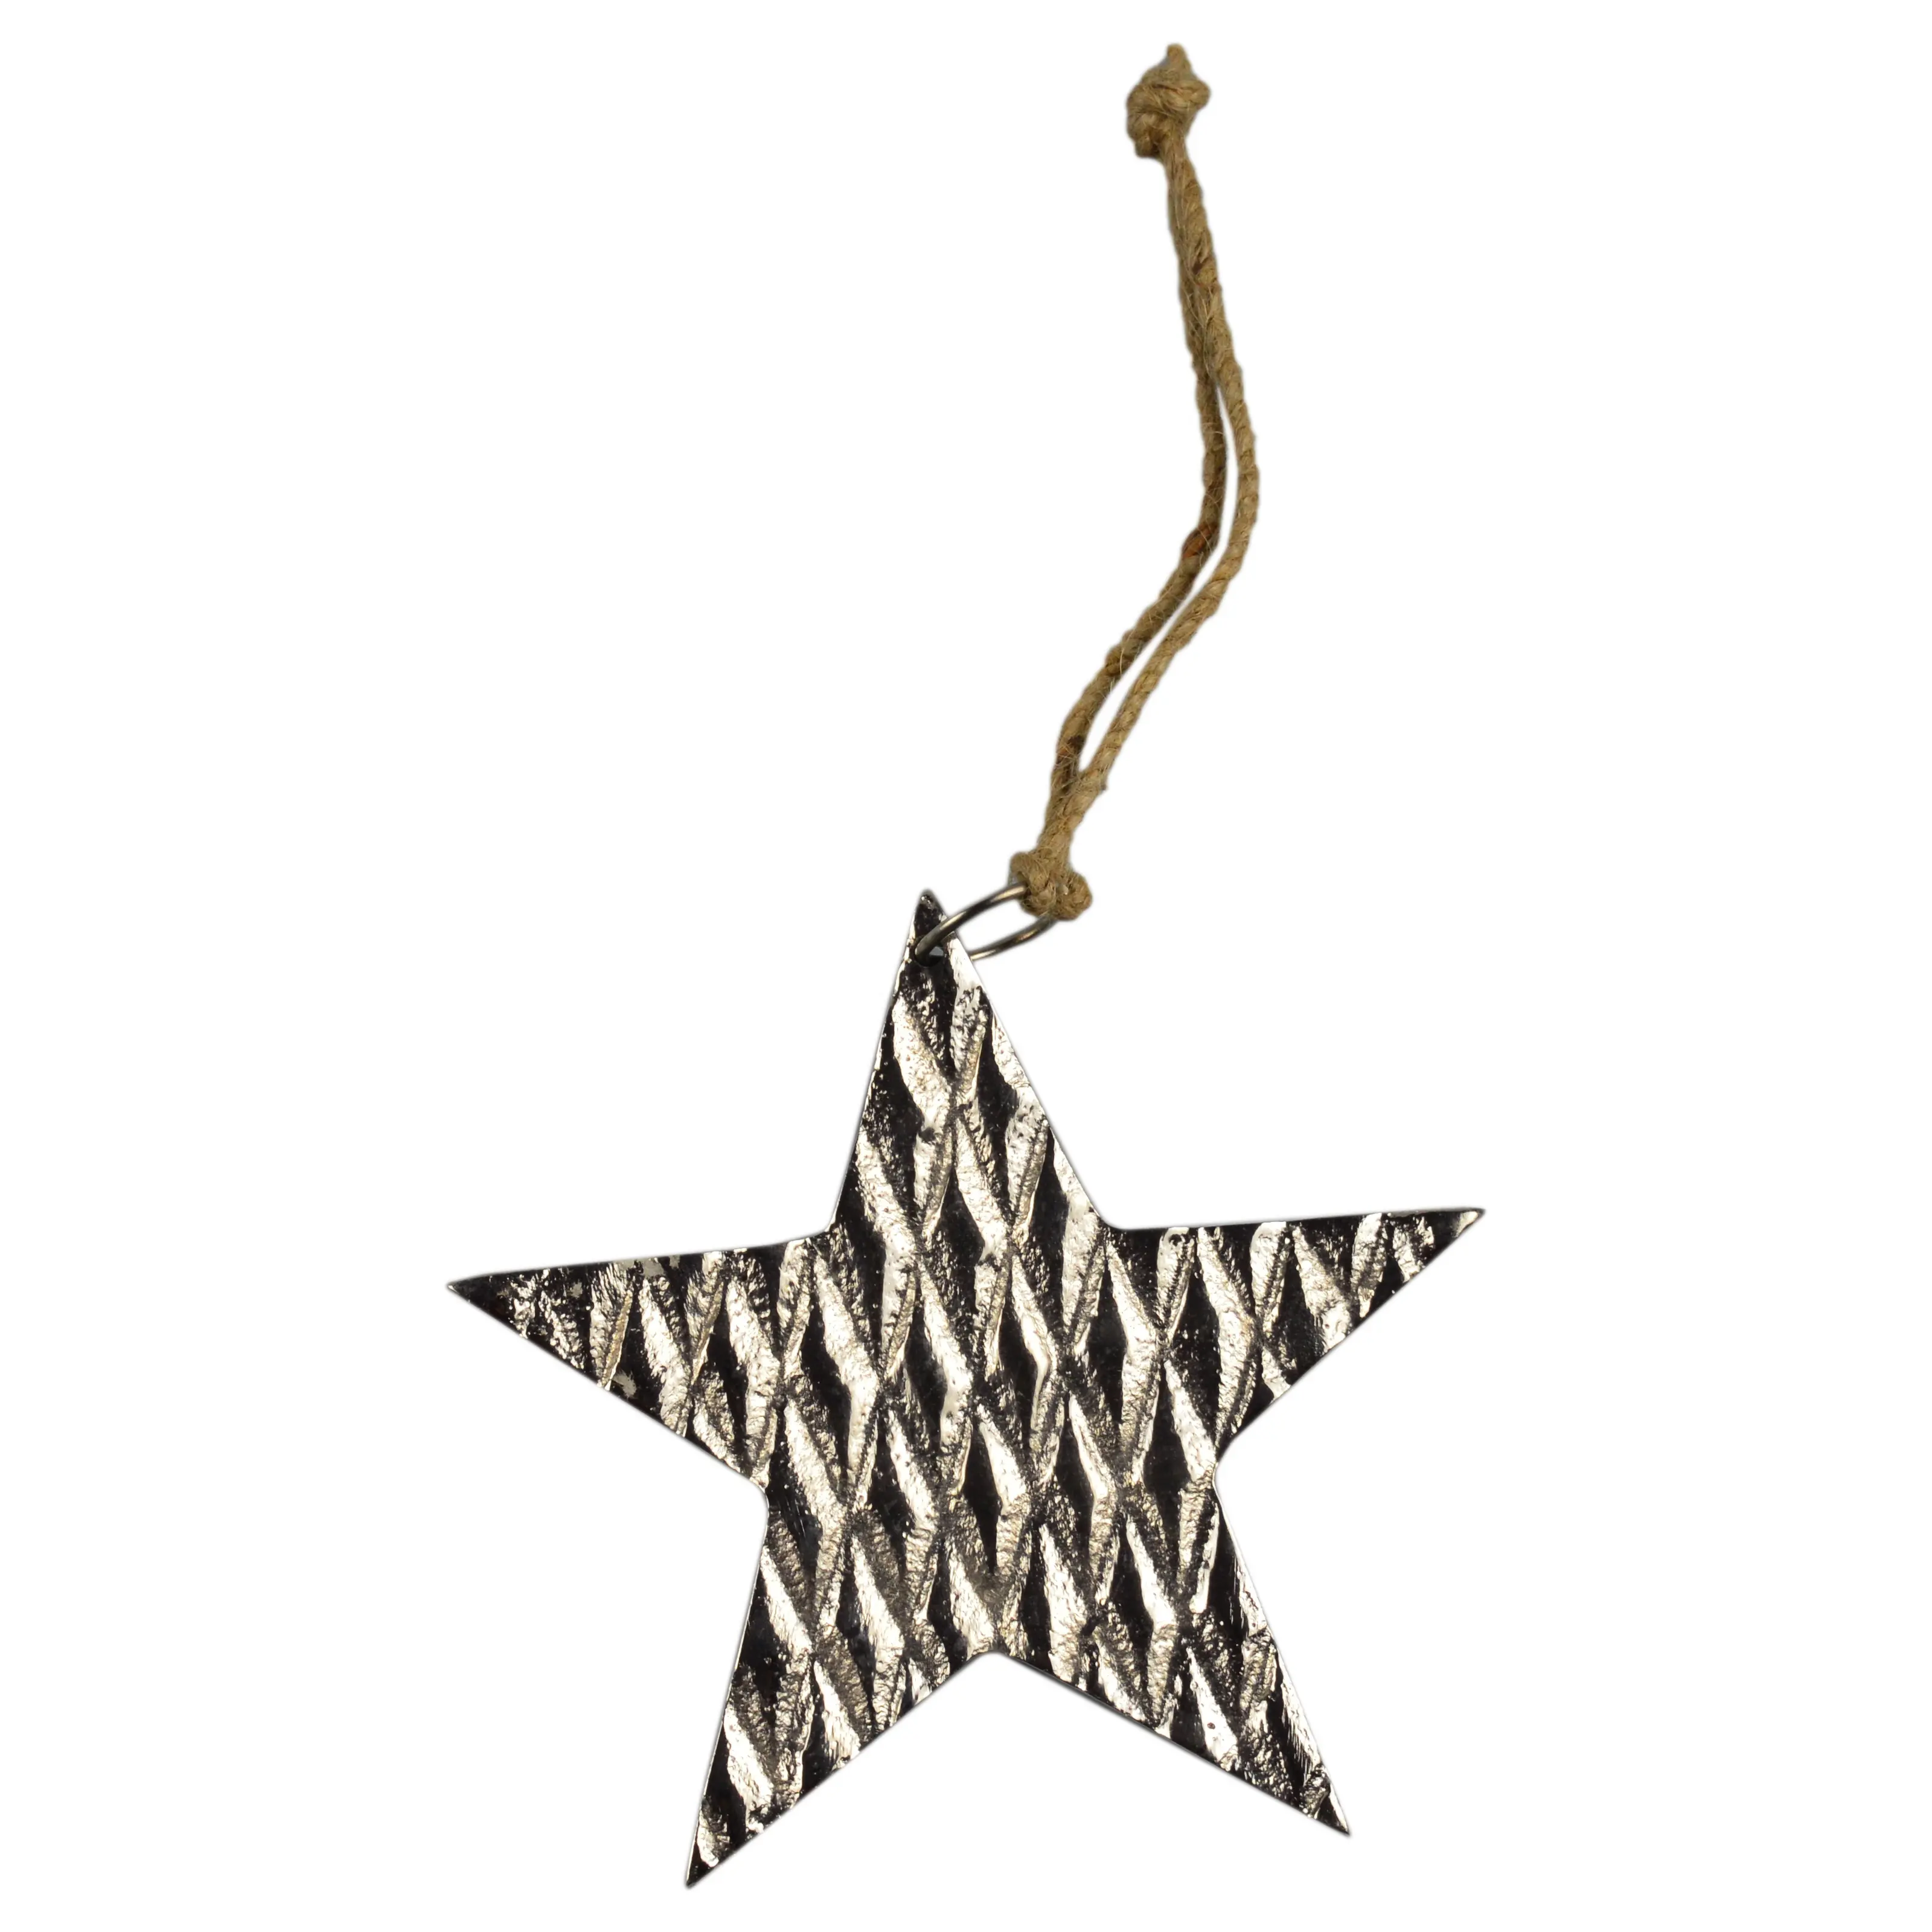 Top Level Quality Aluminium Metal Hanging Star Ornament For Christmas Party Decor And Wedding Decorative Modern Design